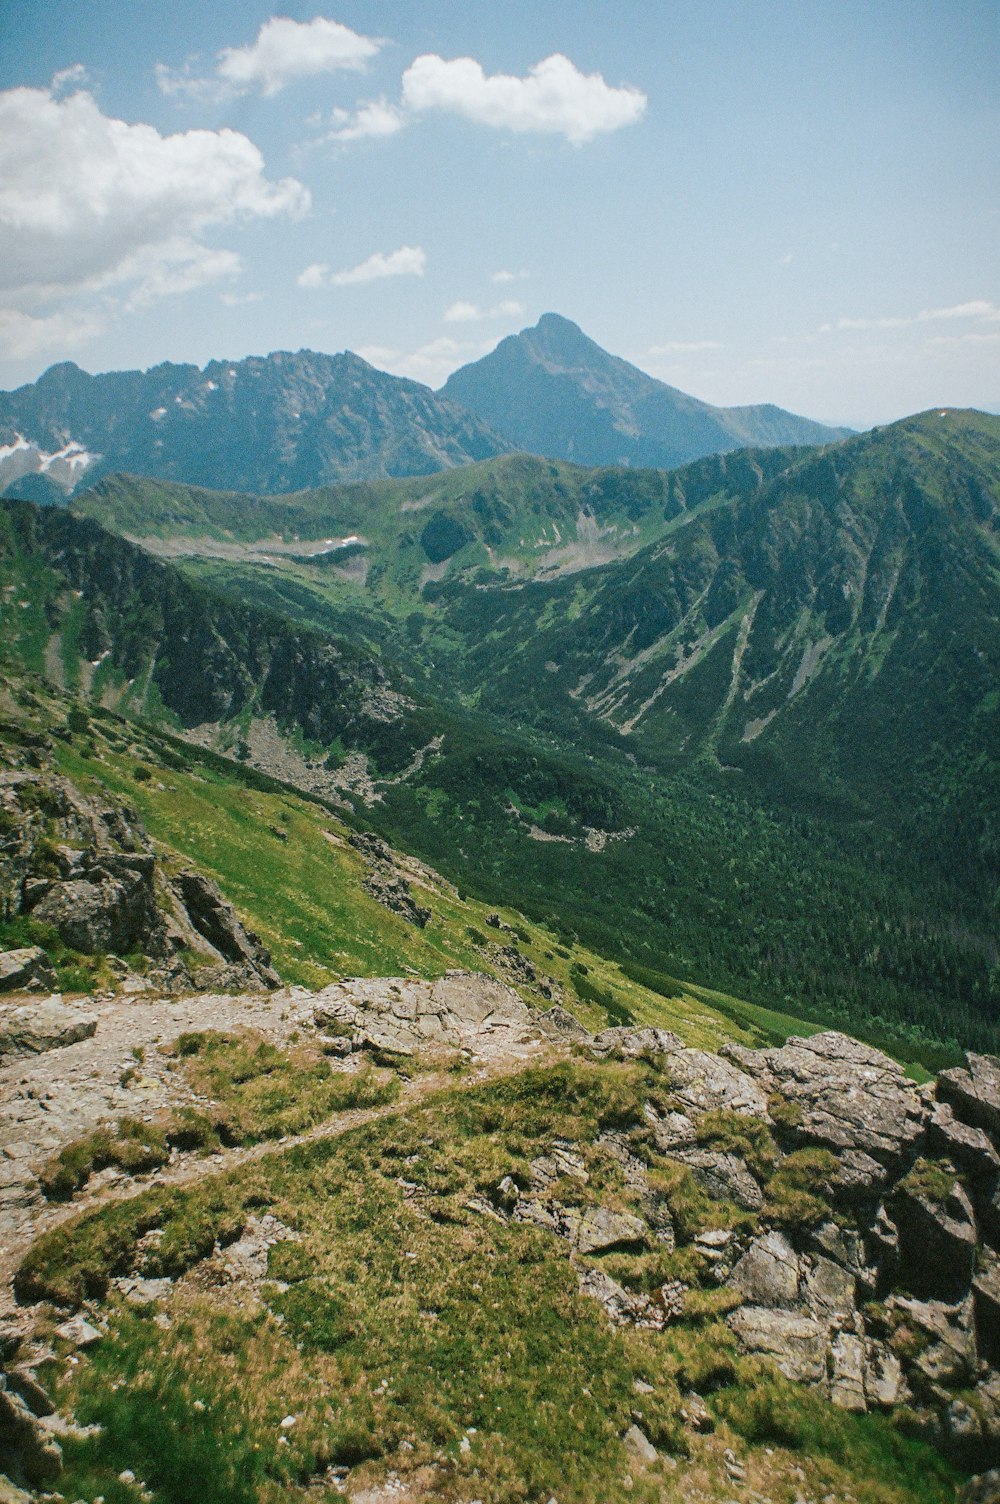 a view of the mountains from a high point of view